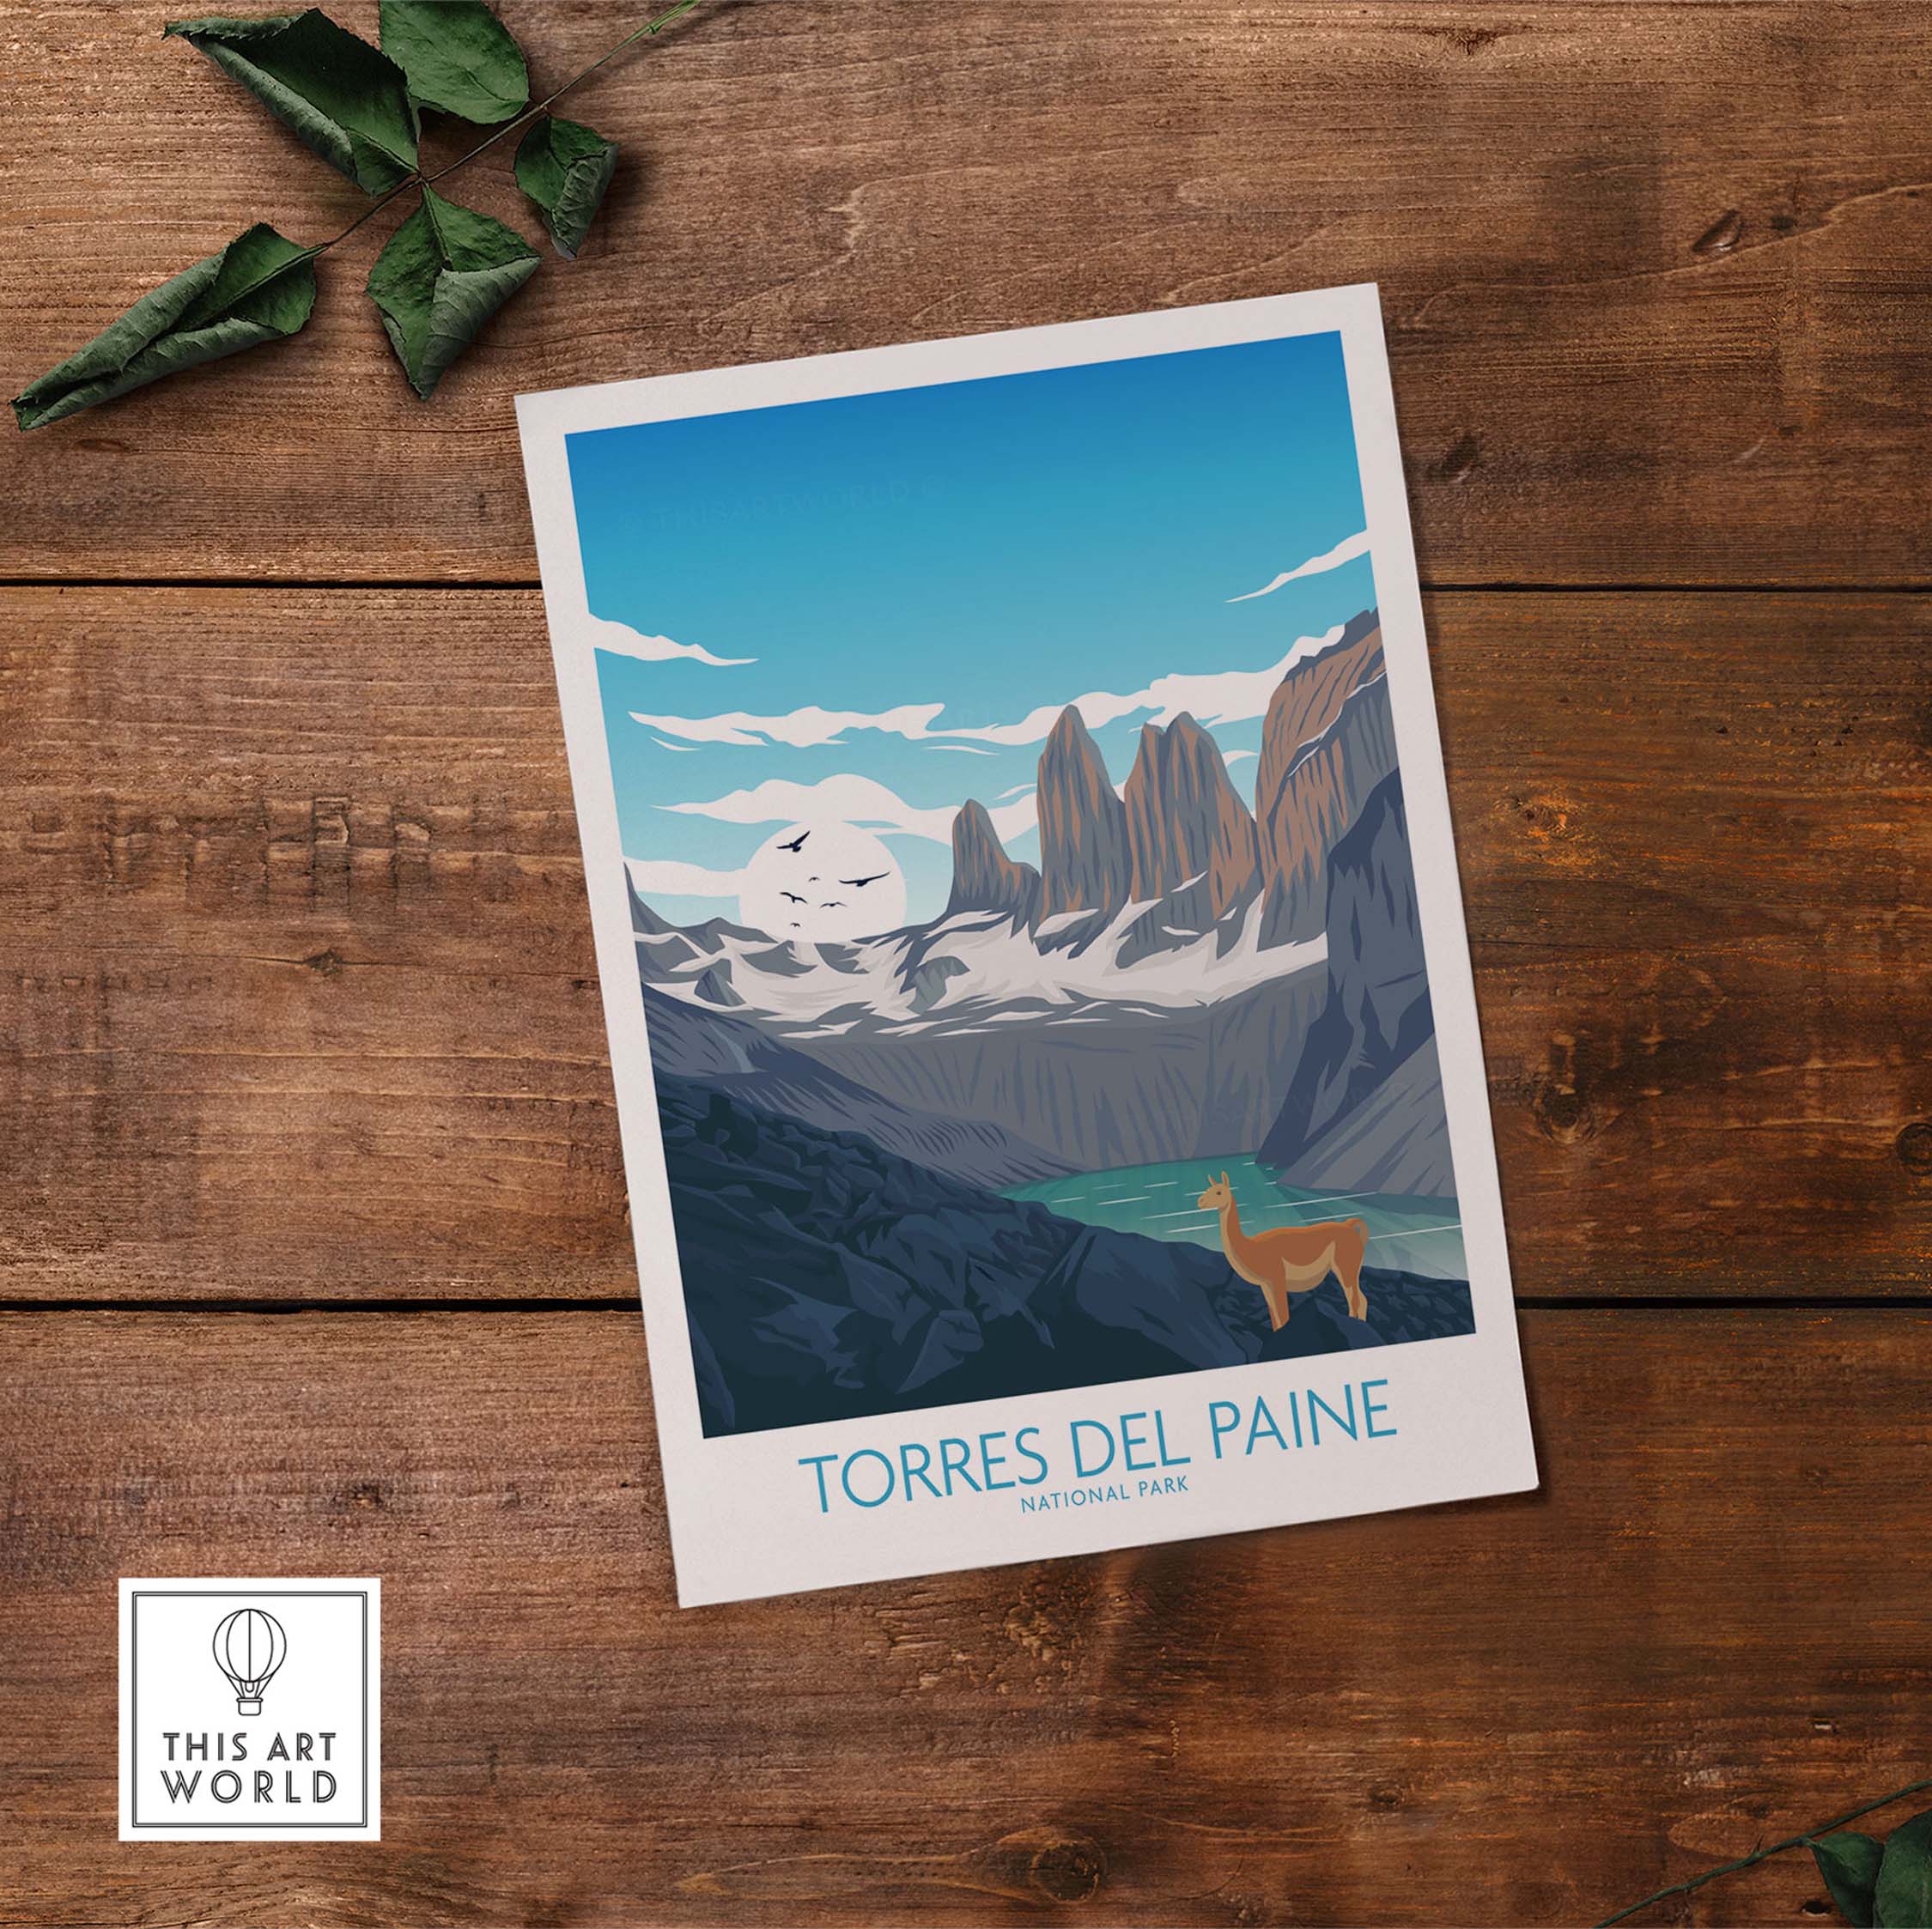 torres del paine chile poster